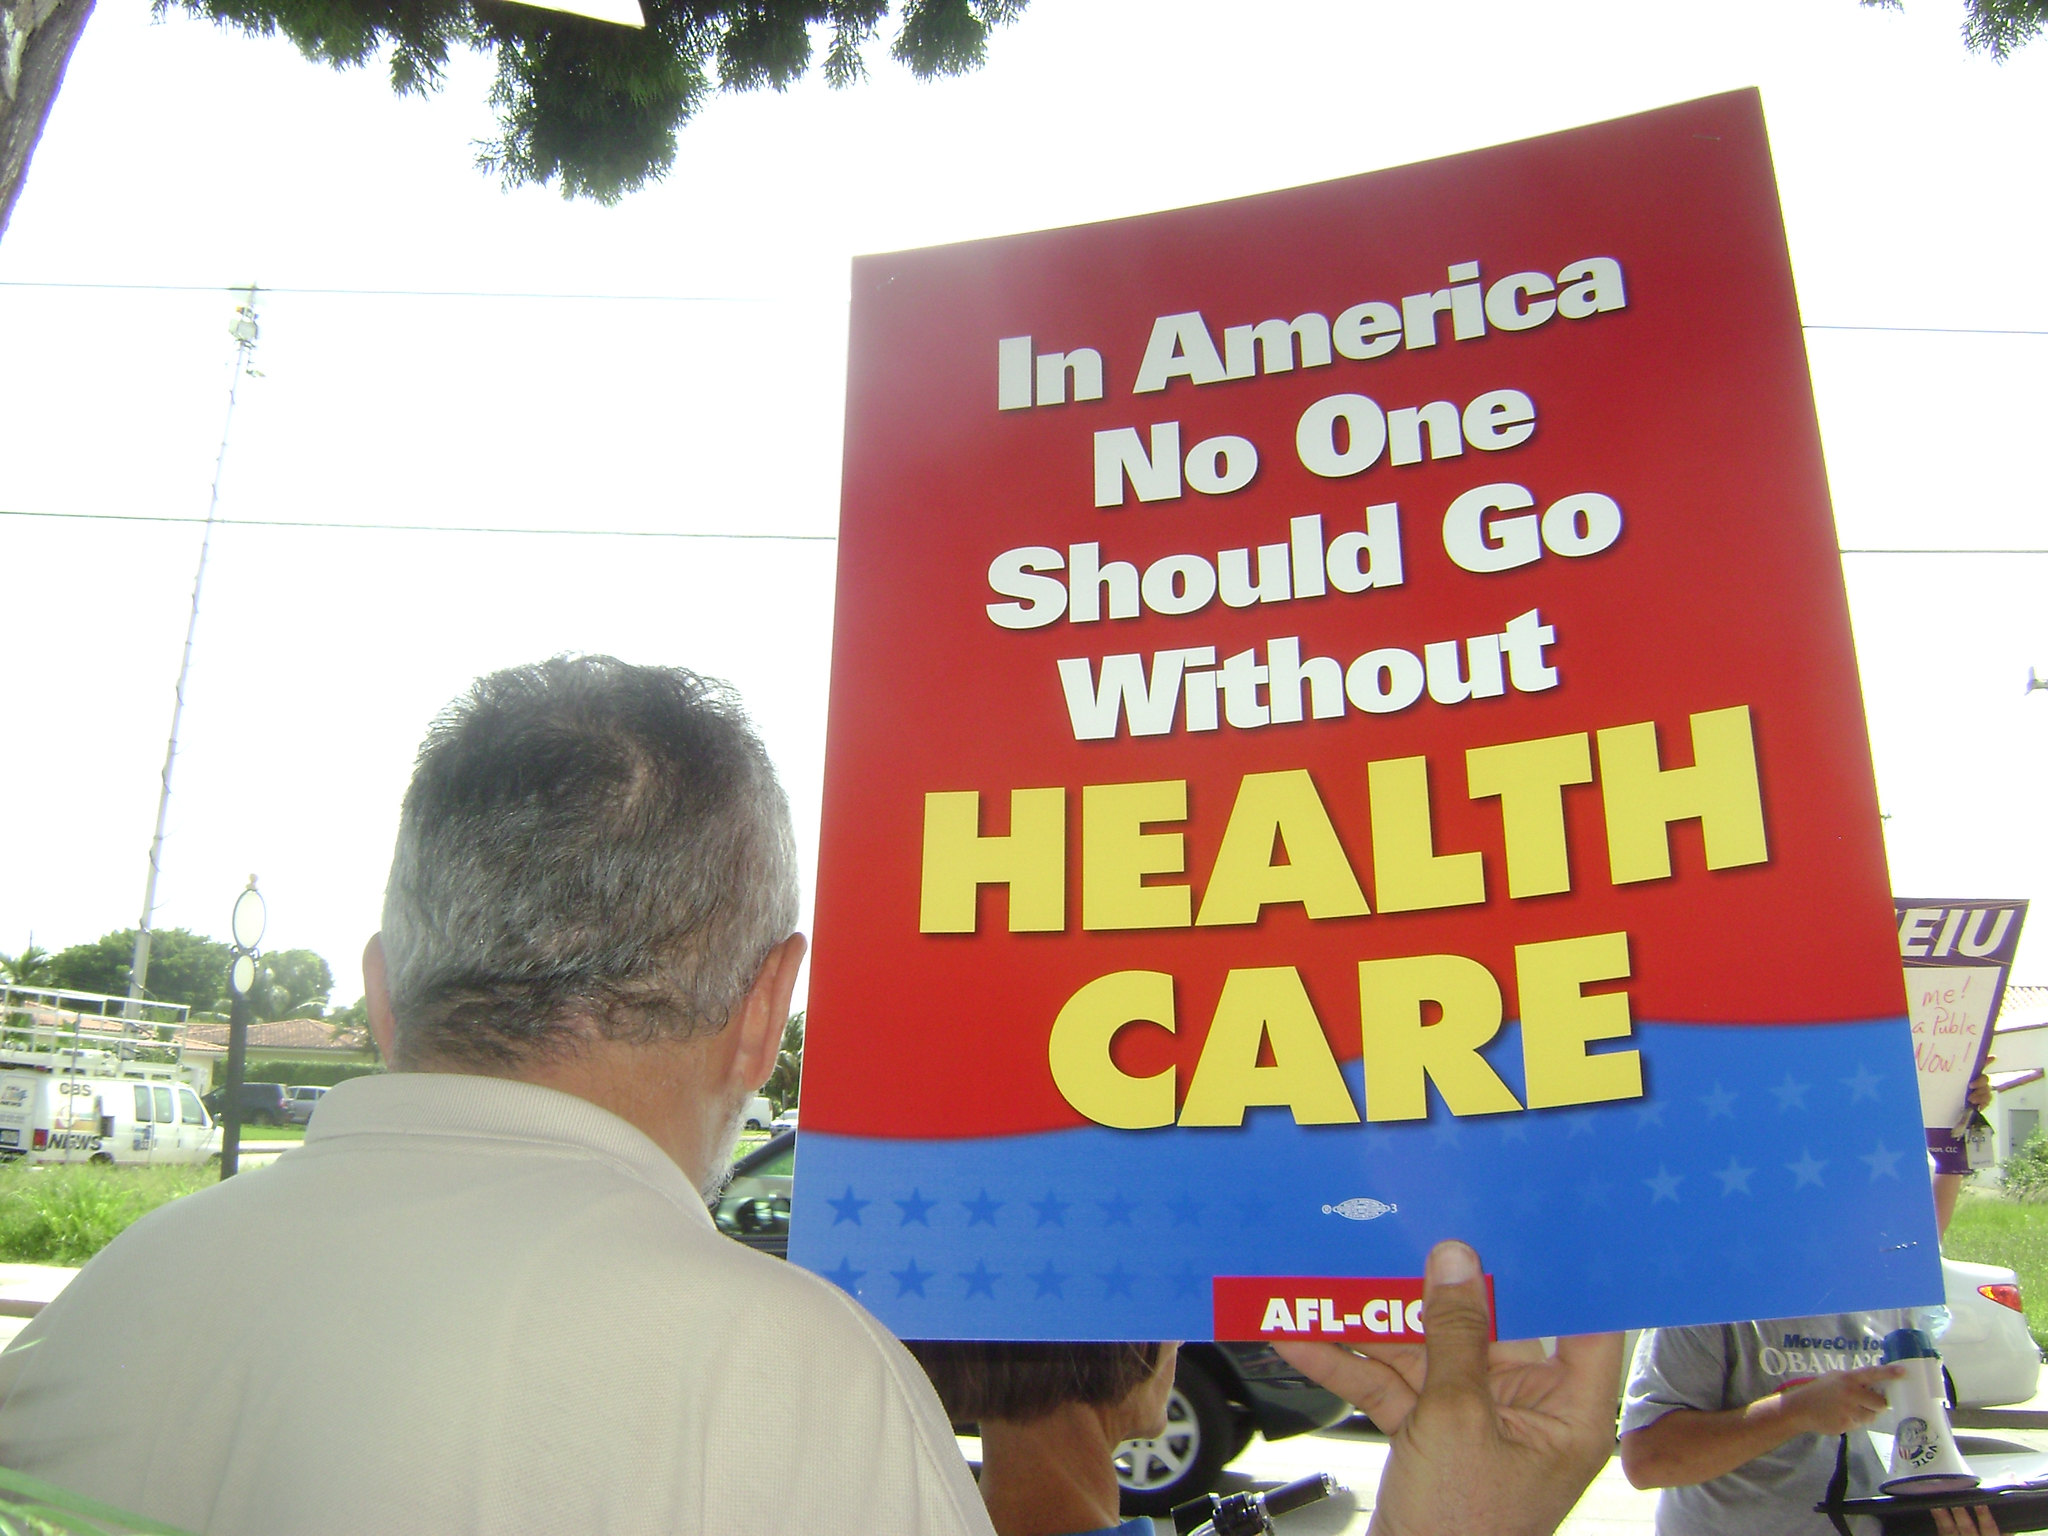 A man holds a sign that says "In America No One Should Go Without Health Care."